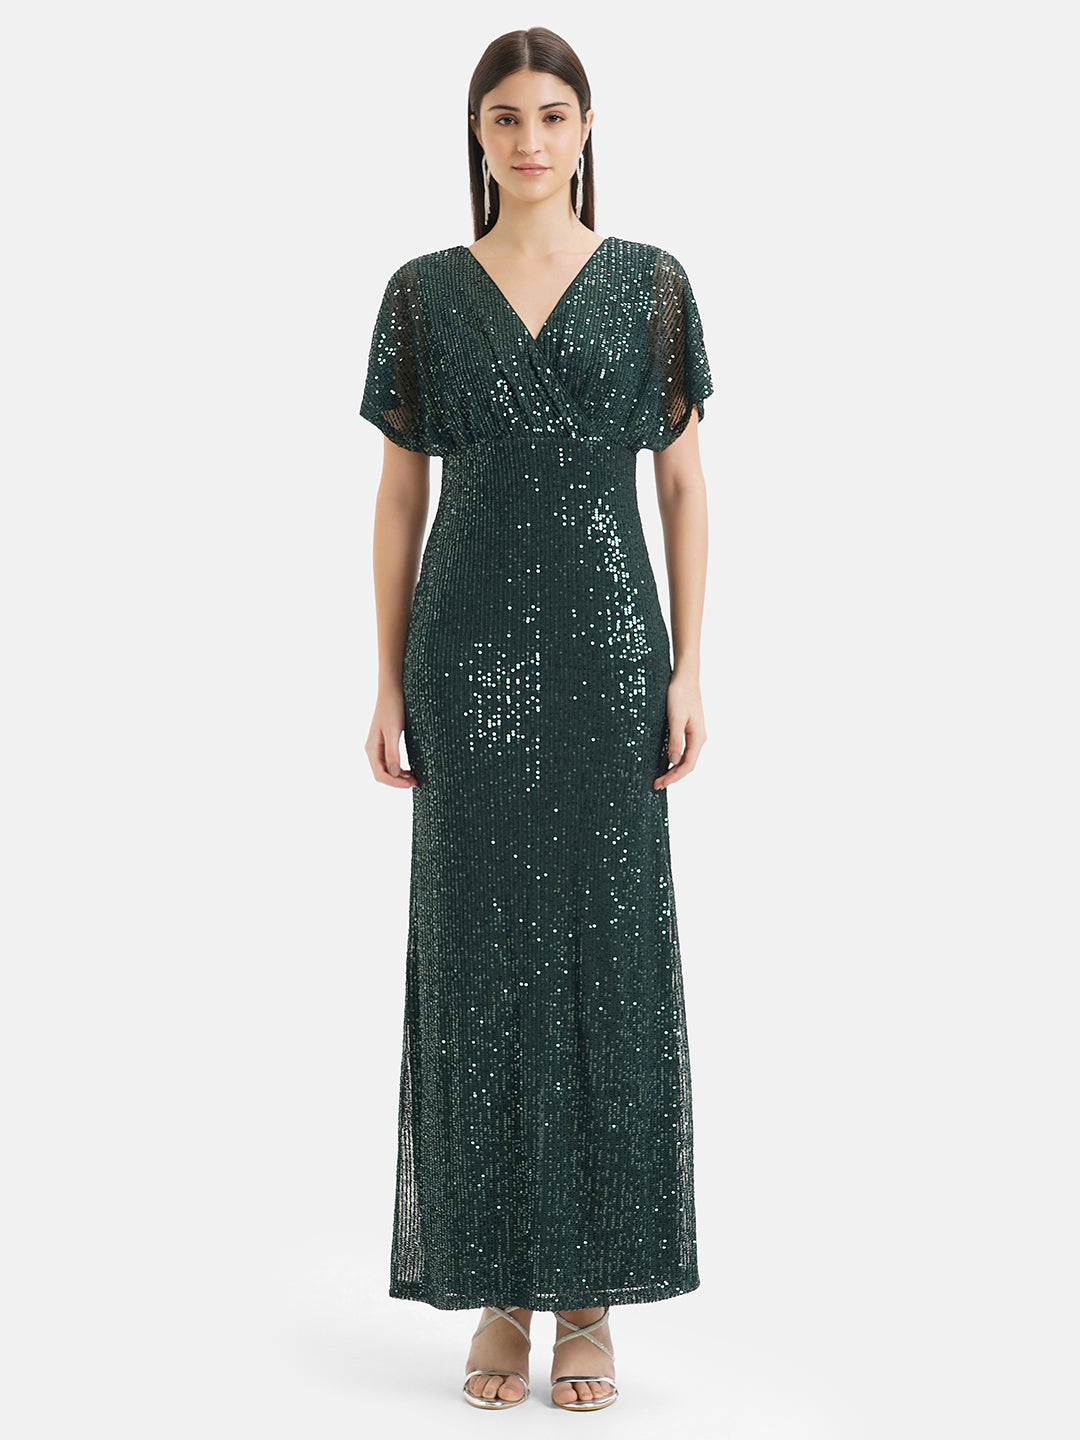 Sparkling Sequin Maxi Dress With Long Sleeves And V Neckline In Grey,  Black, And Red Perfect For Formal Evening And Night Parties Style #220330  From Mu02, $47.76 | DHgate.Com